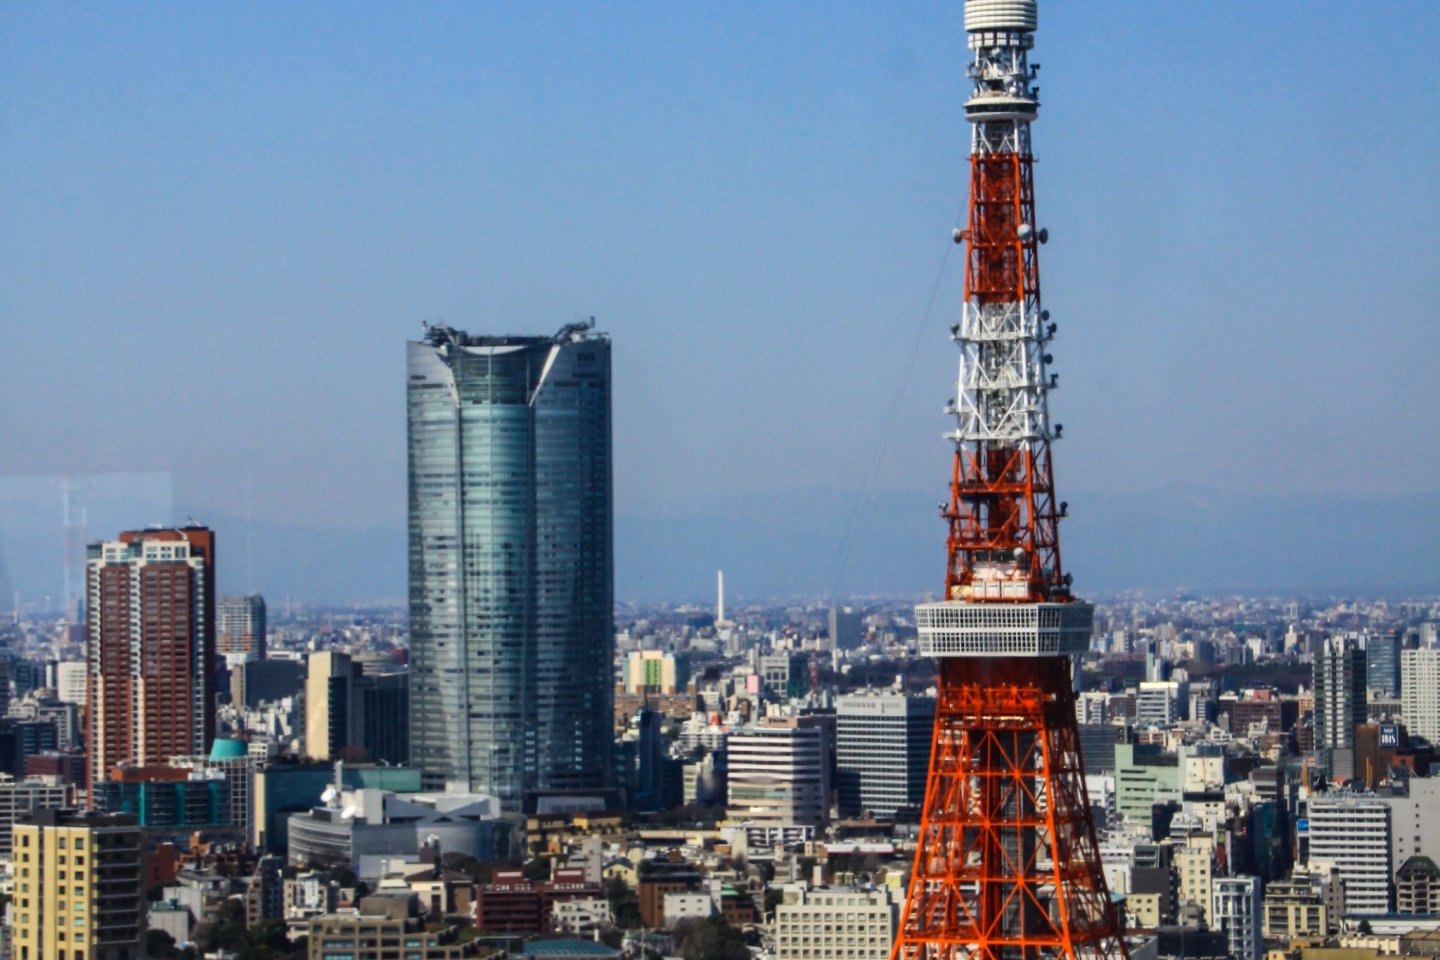 Roppongi Hills and the Tokyo Tower